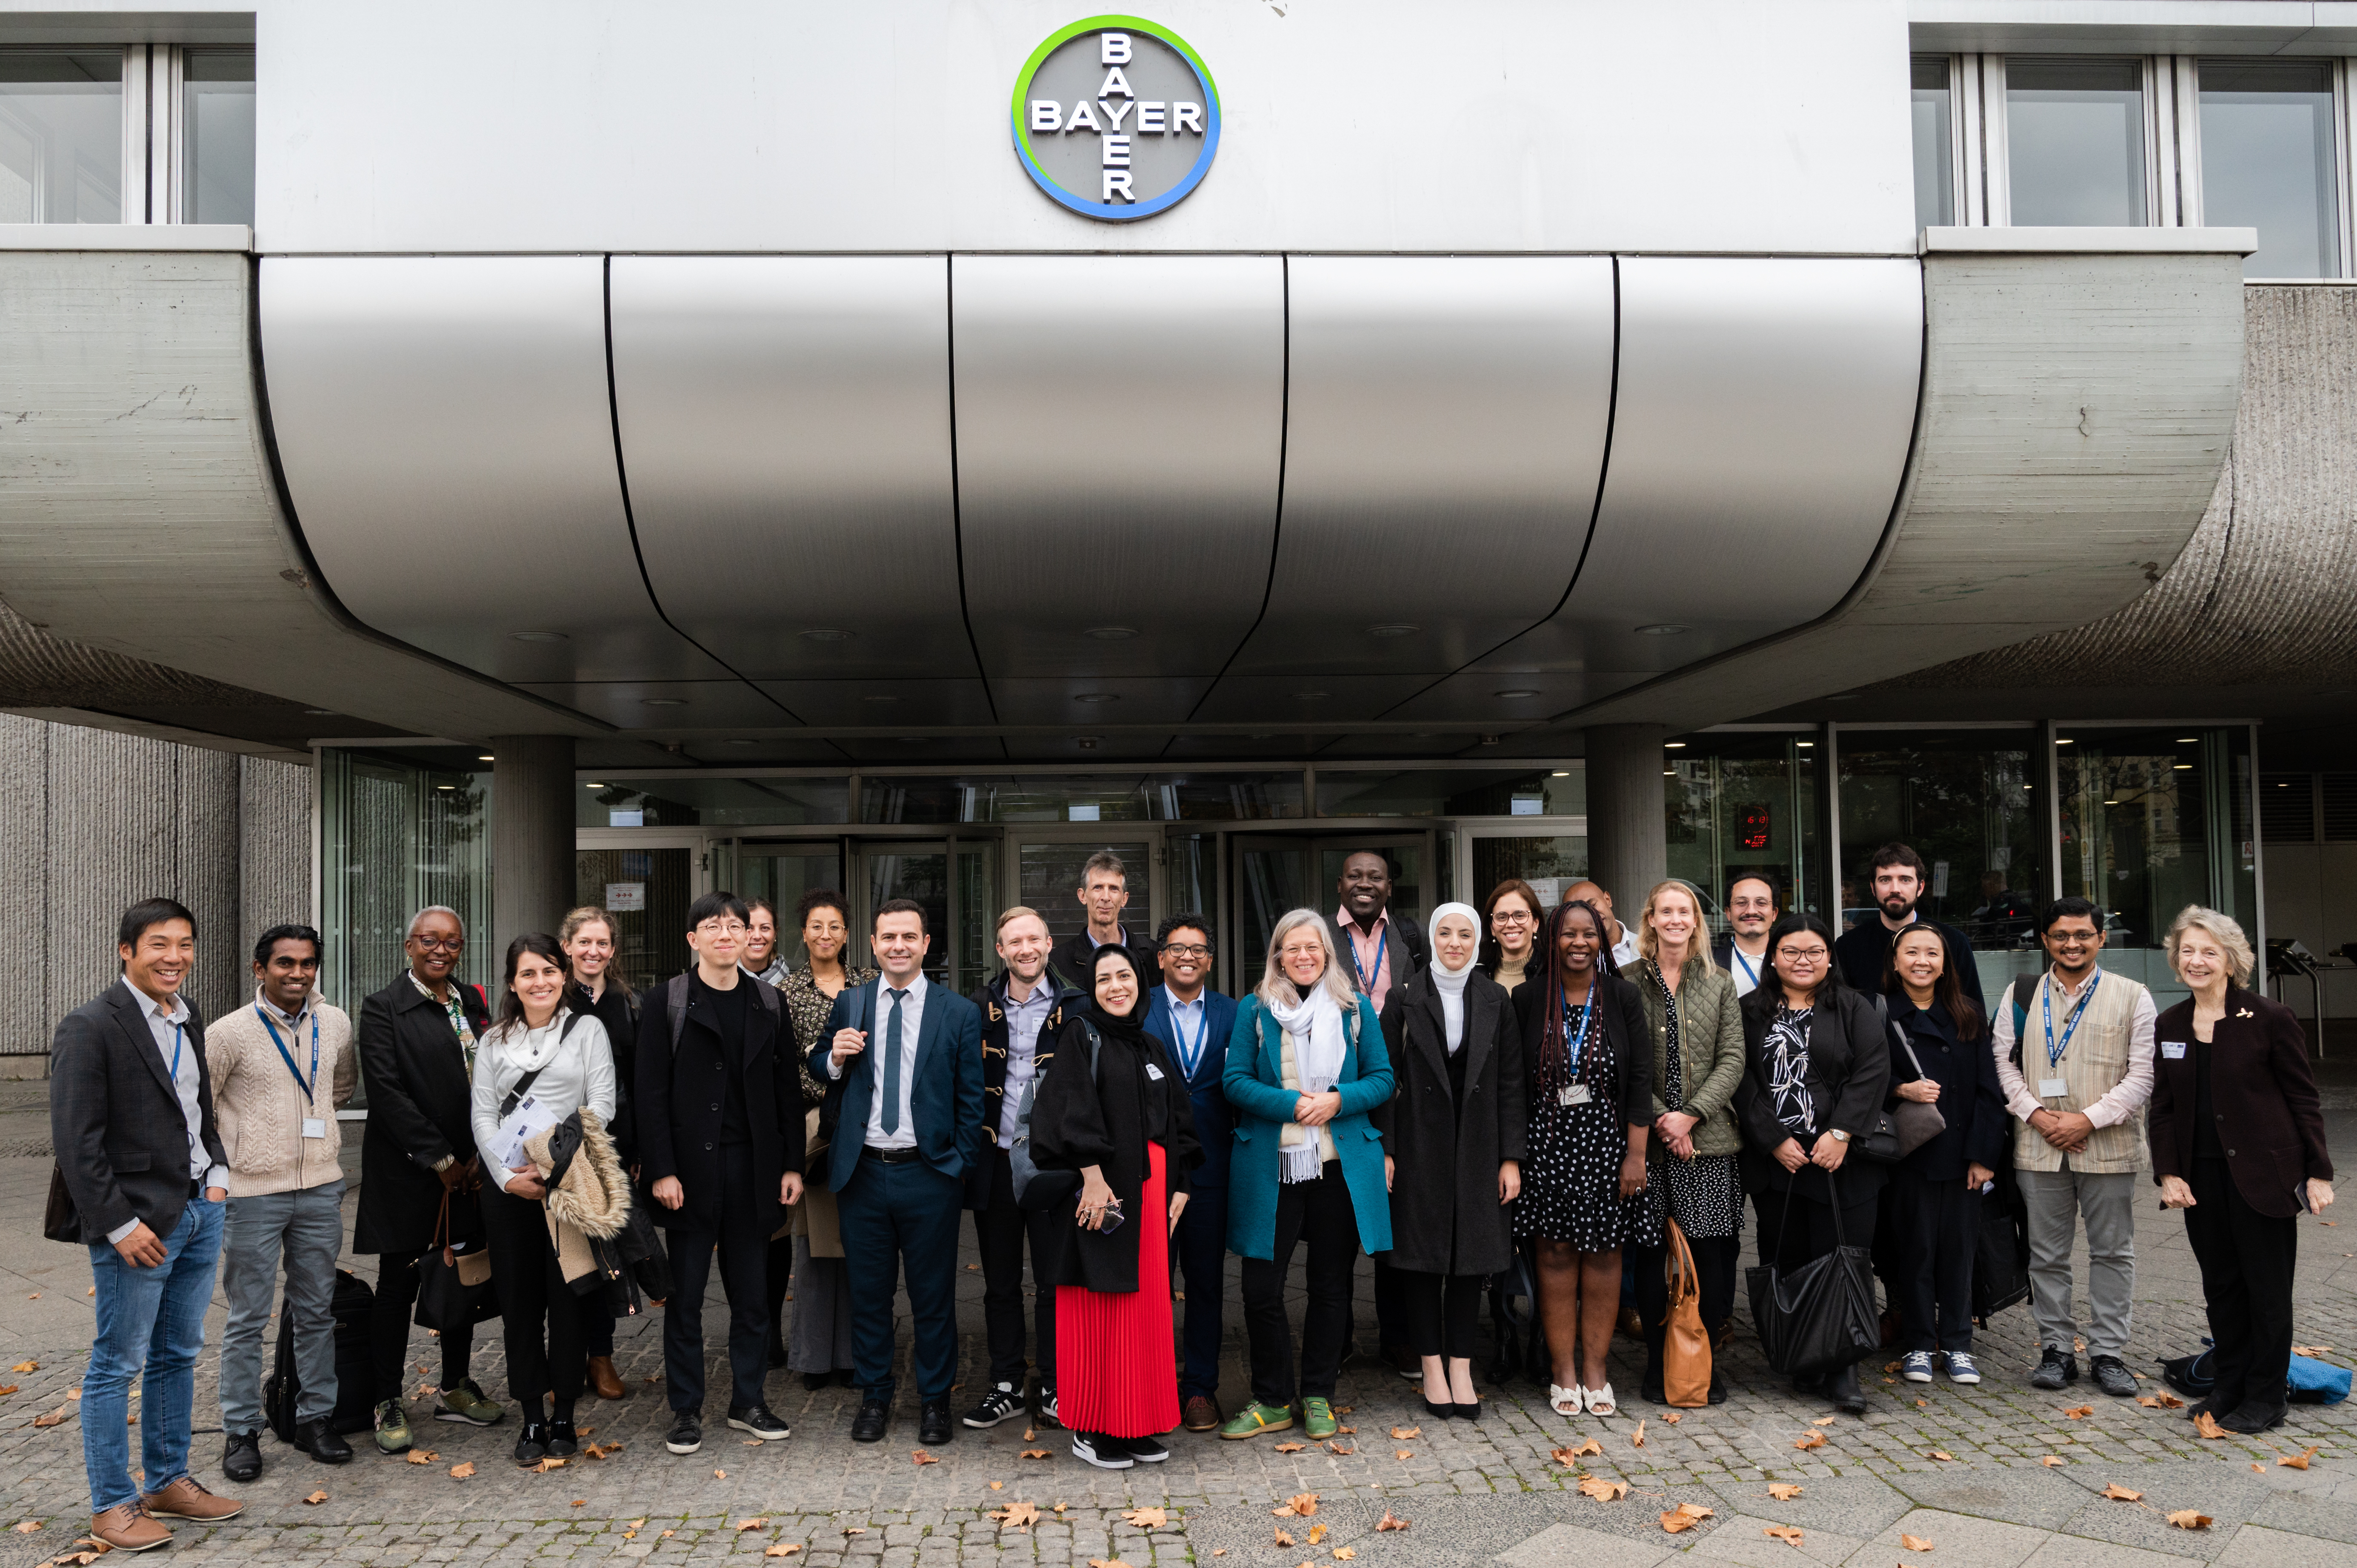 The 2022 YPL cohort in front of the Bayer Foundation (photo: G. Ortolani/IAP)